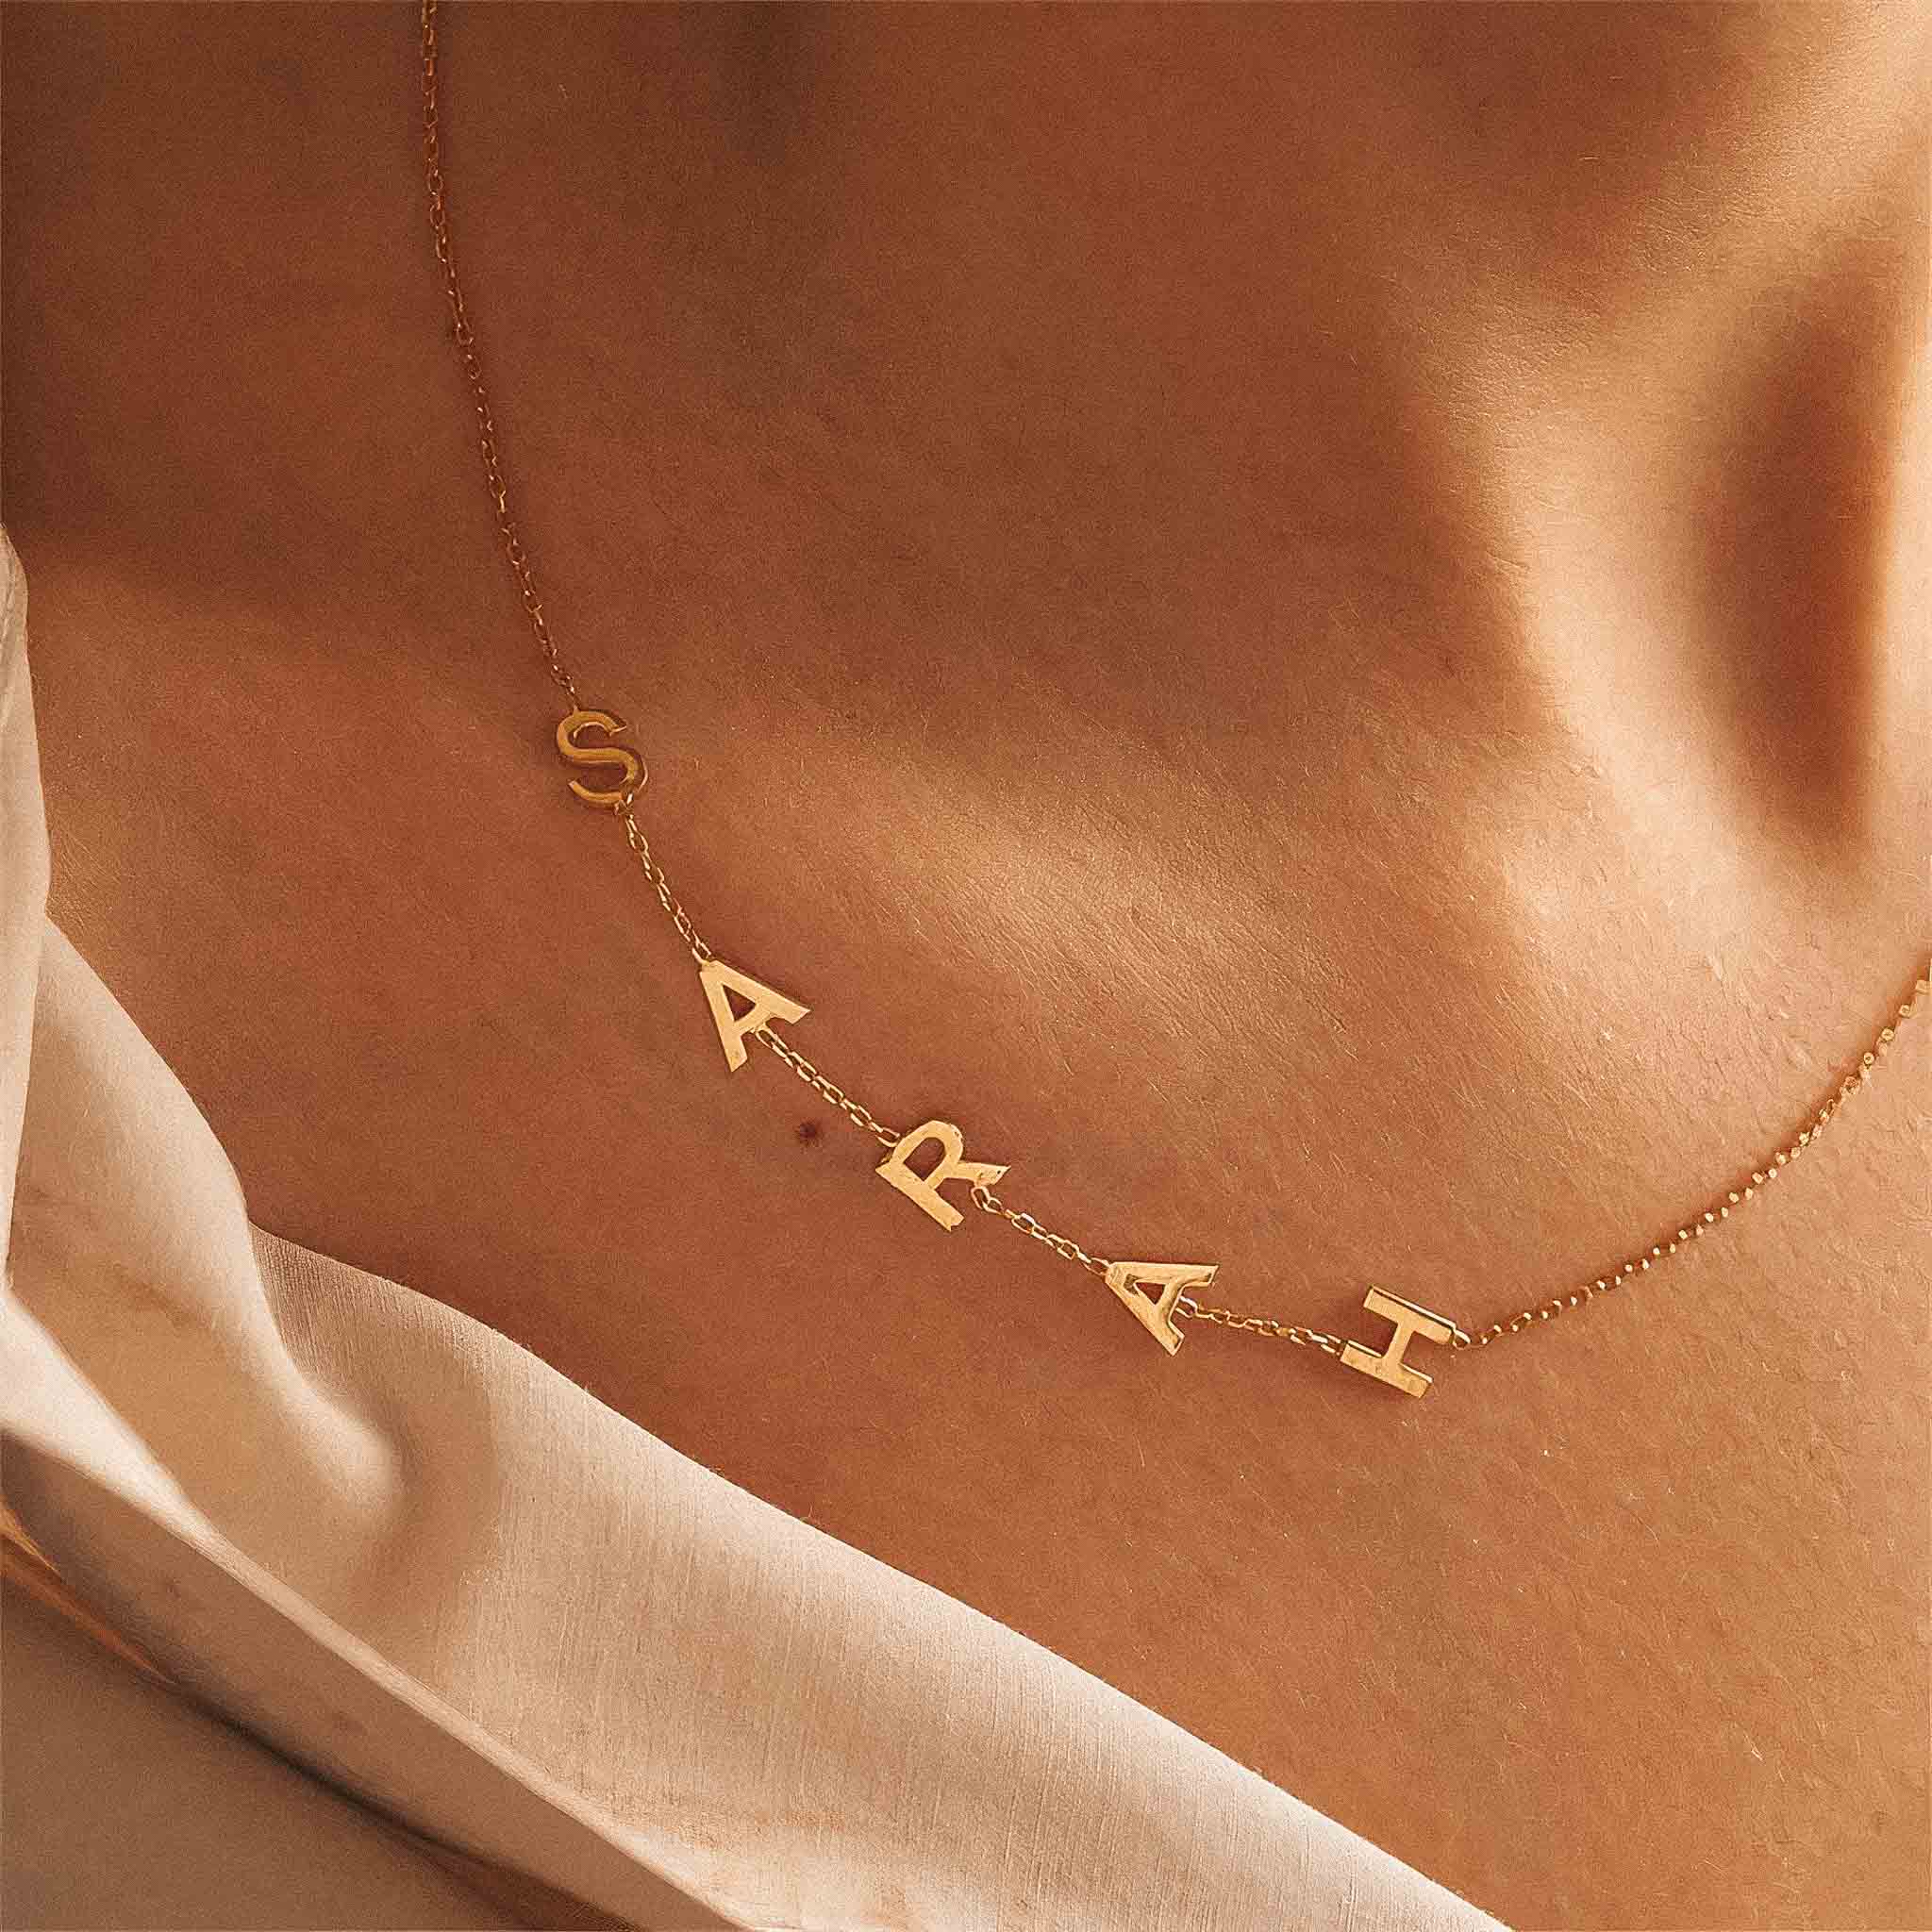 15 initial necklaces to shop this season - TODAY